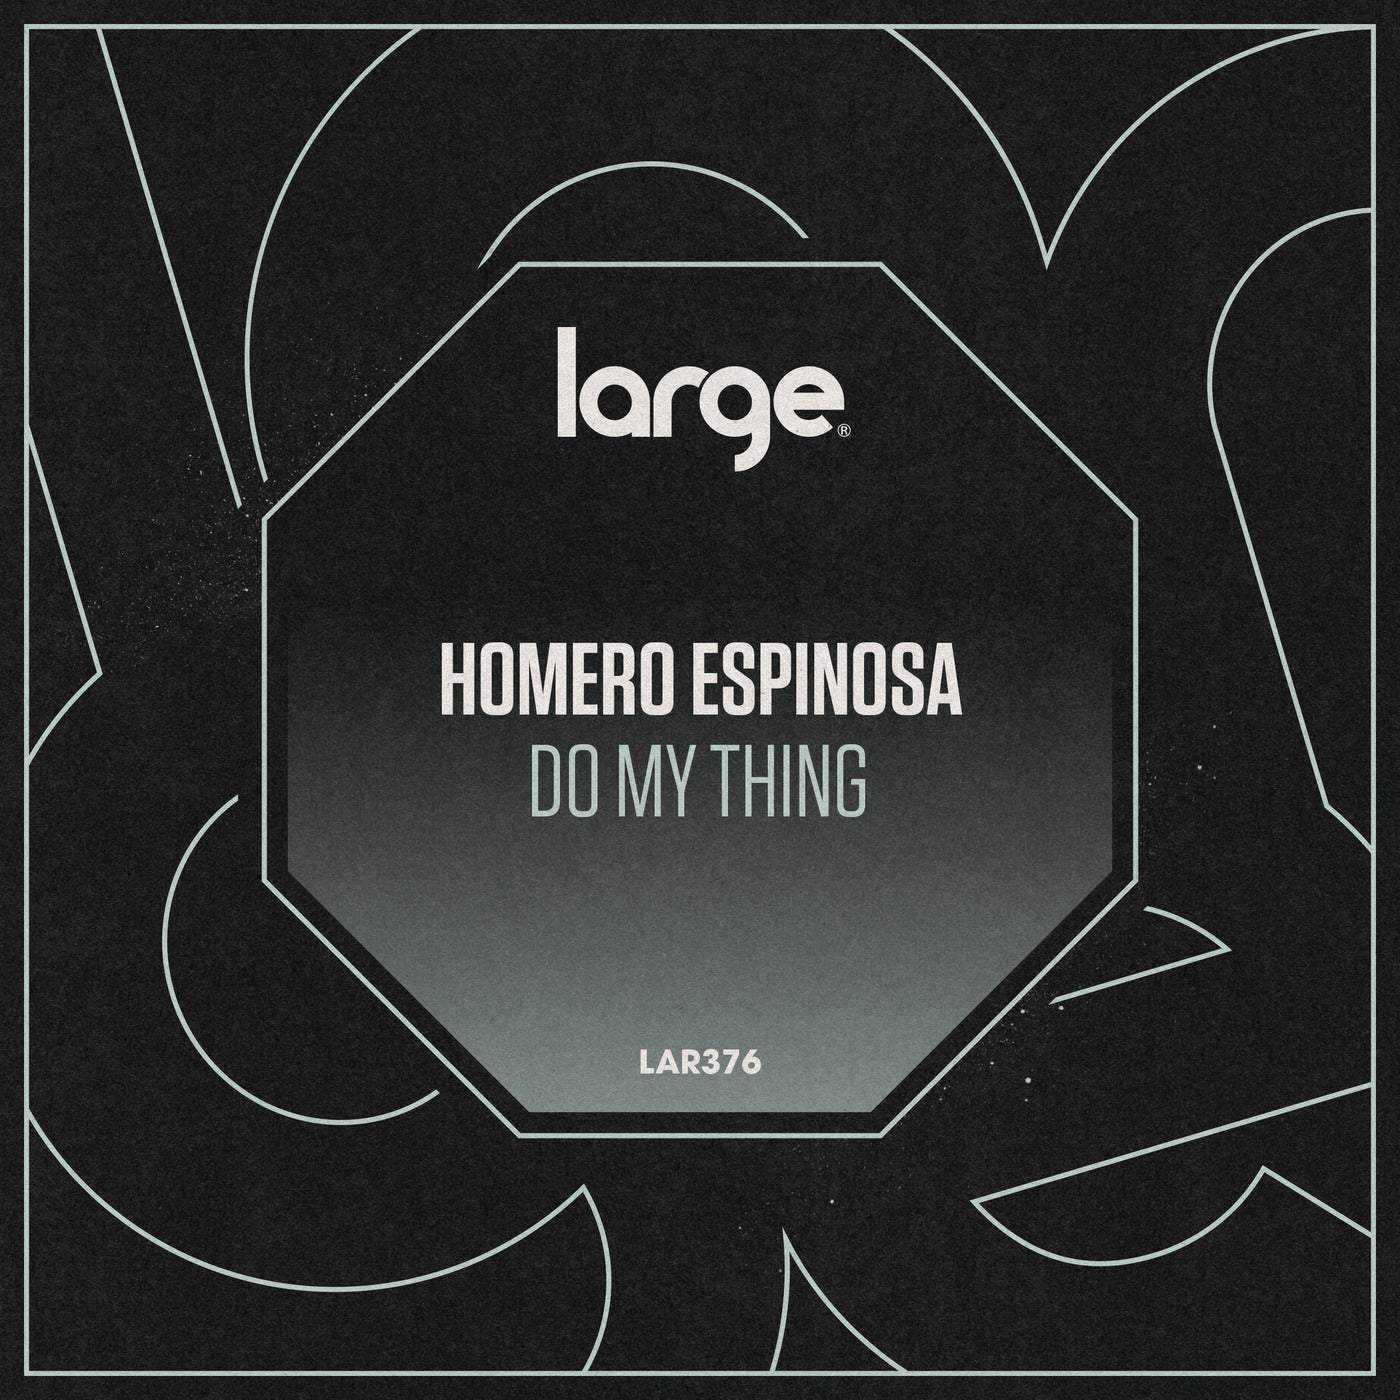 Download Homero Espinosa - Do My Thing [LAR376] on Electrobuzz